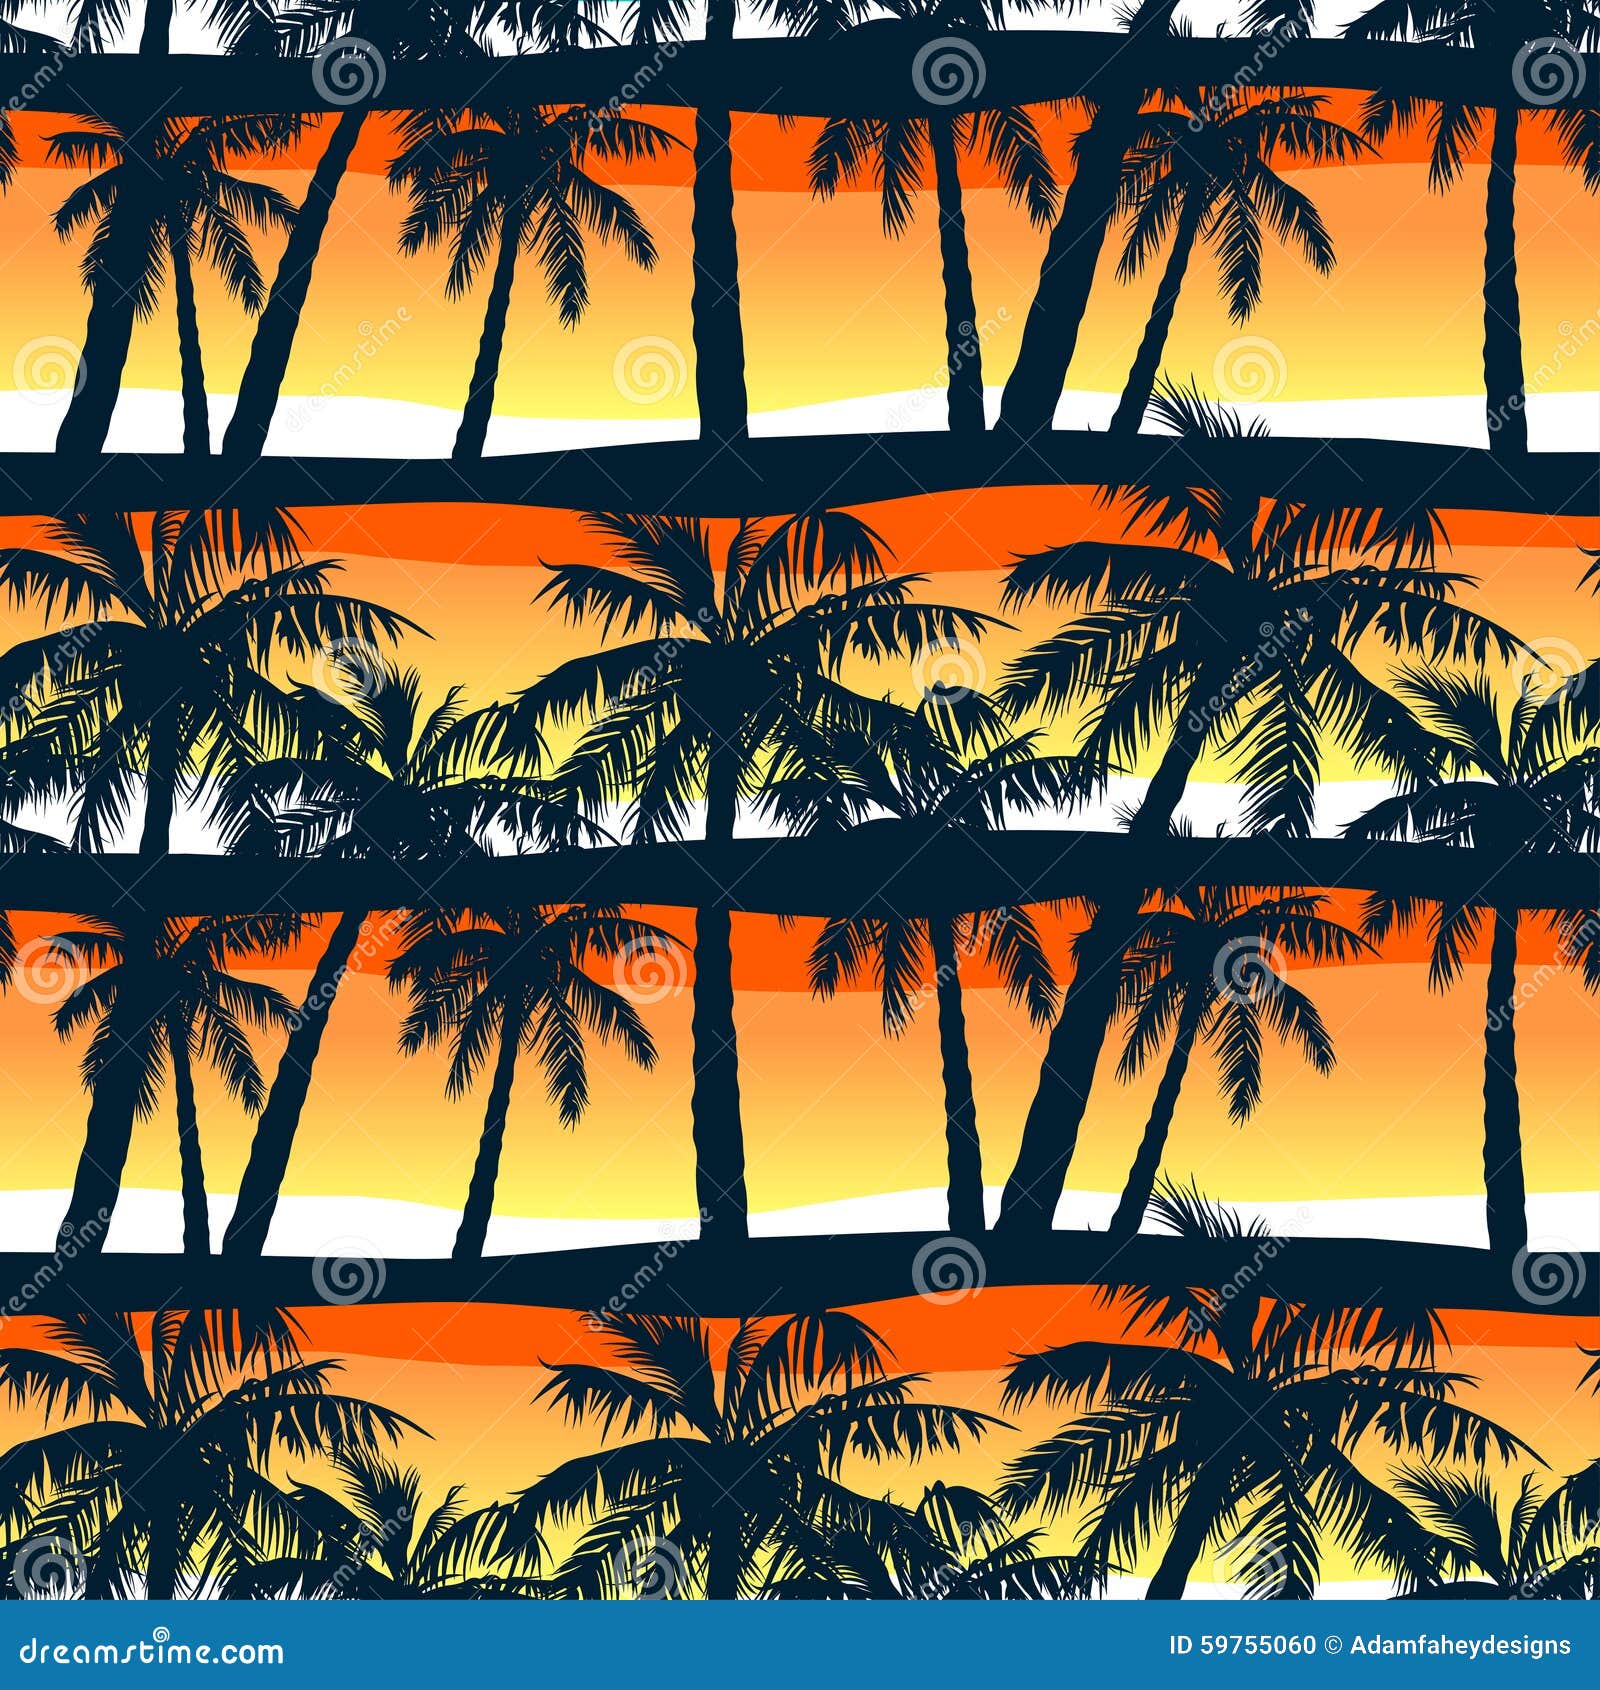 tropical palms trees at sunset in a seamless pattern